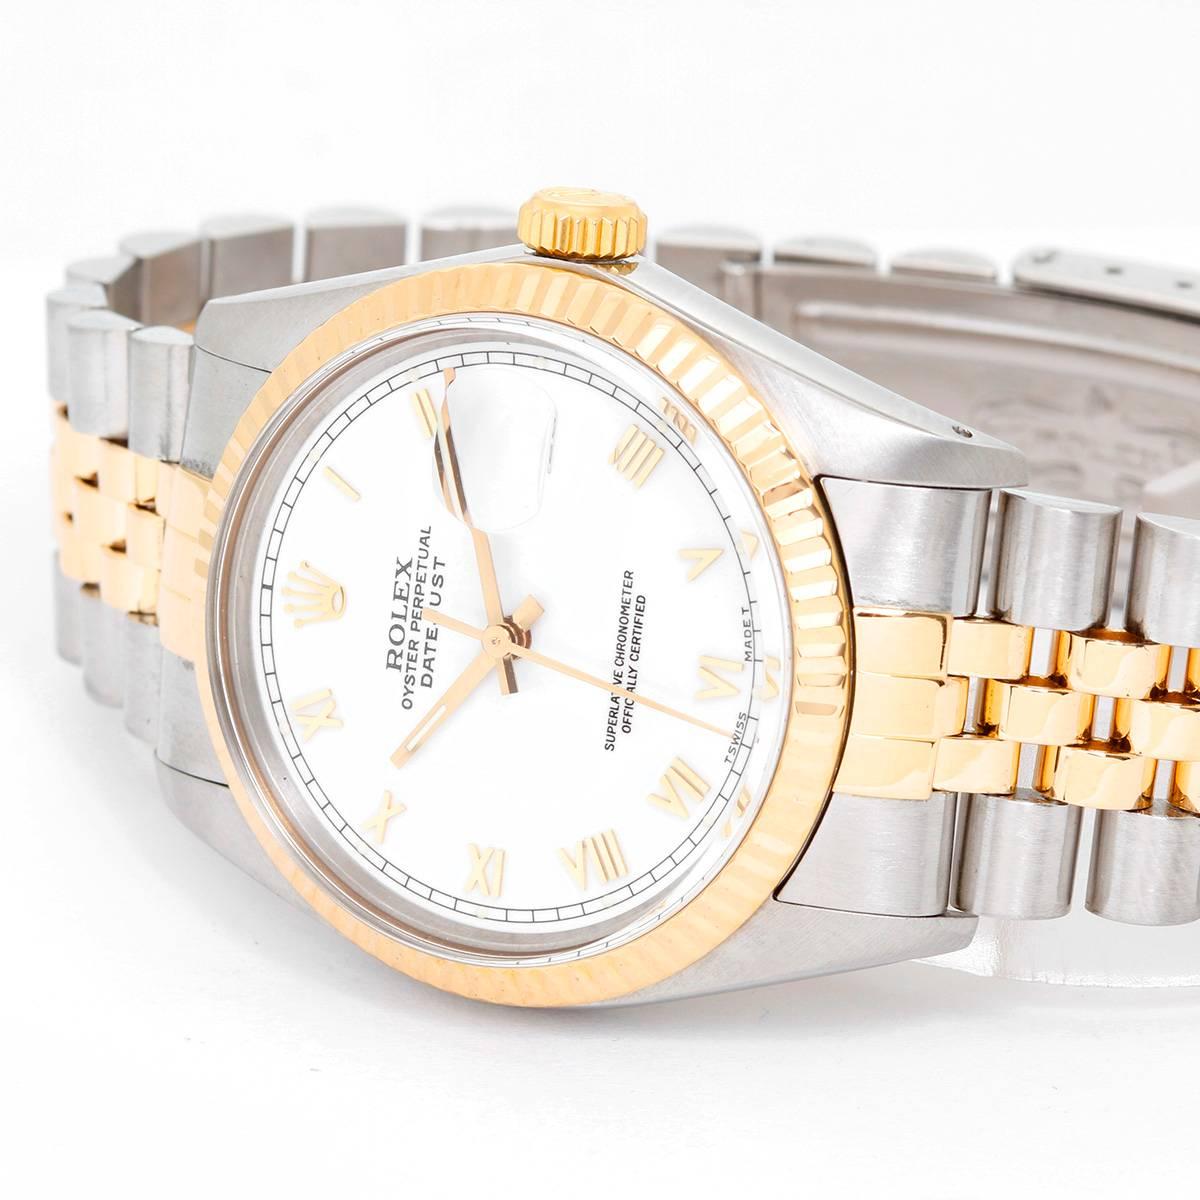 Rolex Datejust Men's 2-Tone Watch 16013 -  Automatic winding, 27 jewels, Quickset, acrylic crystal. Stainless steel case with 18k yellow gold fluted bezel (36mm diameter). White dial with gold Roman numerals. Stainless steel and 18k yellow gold